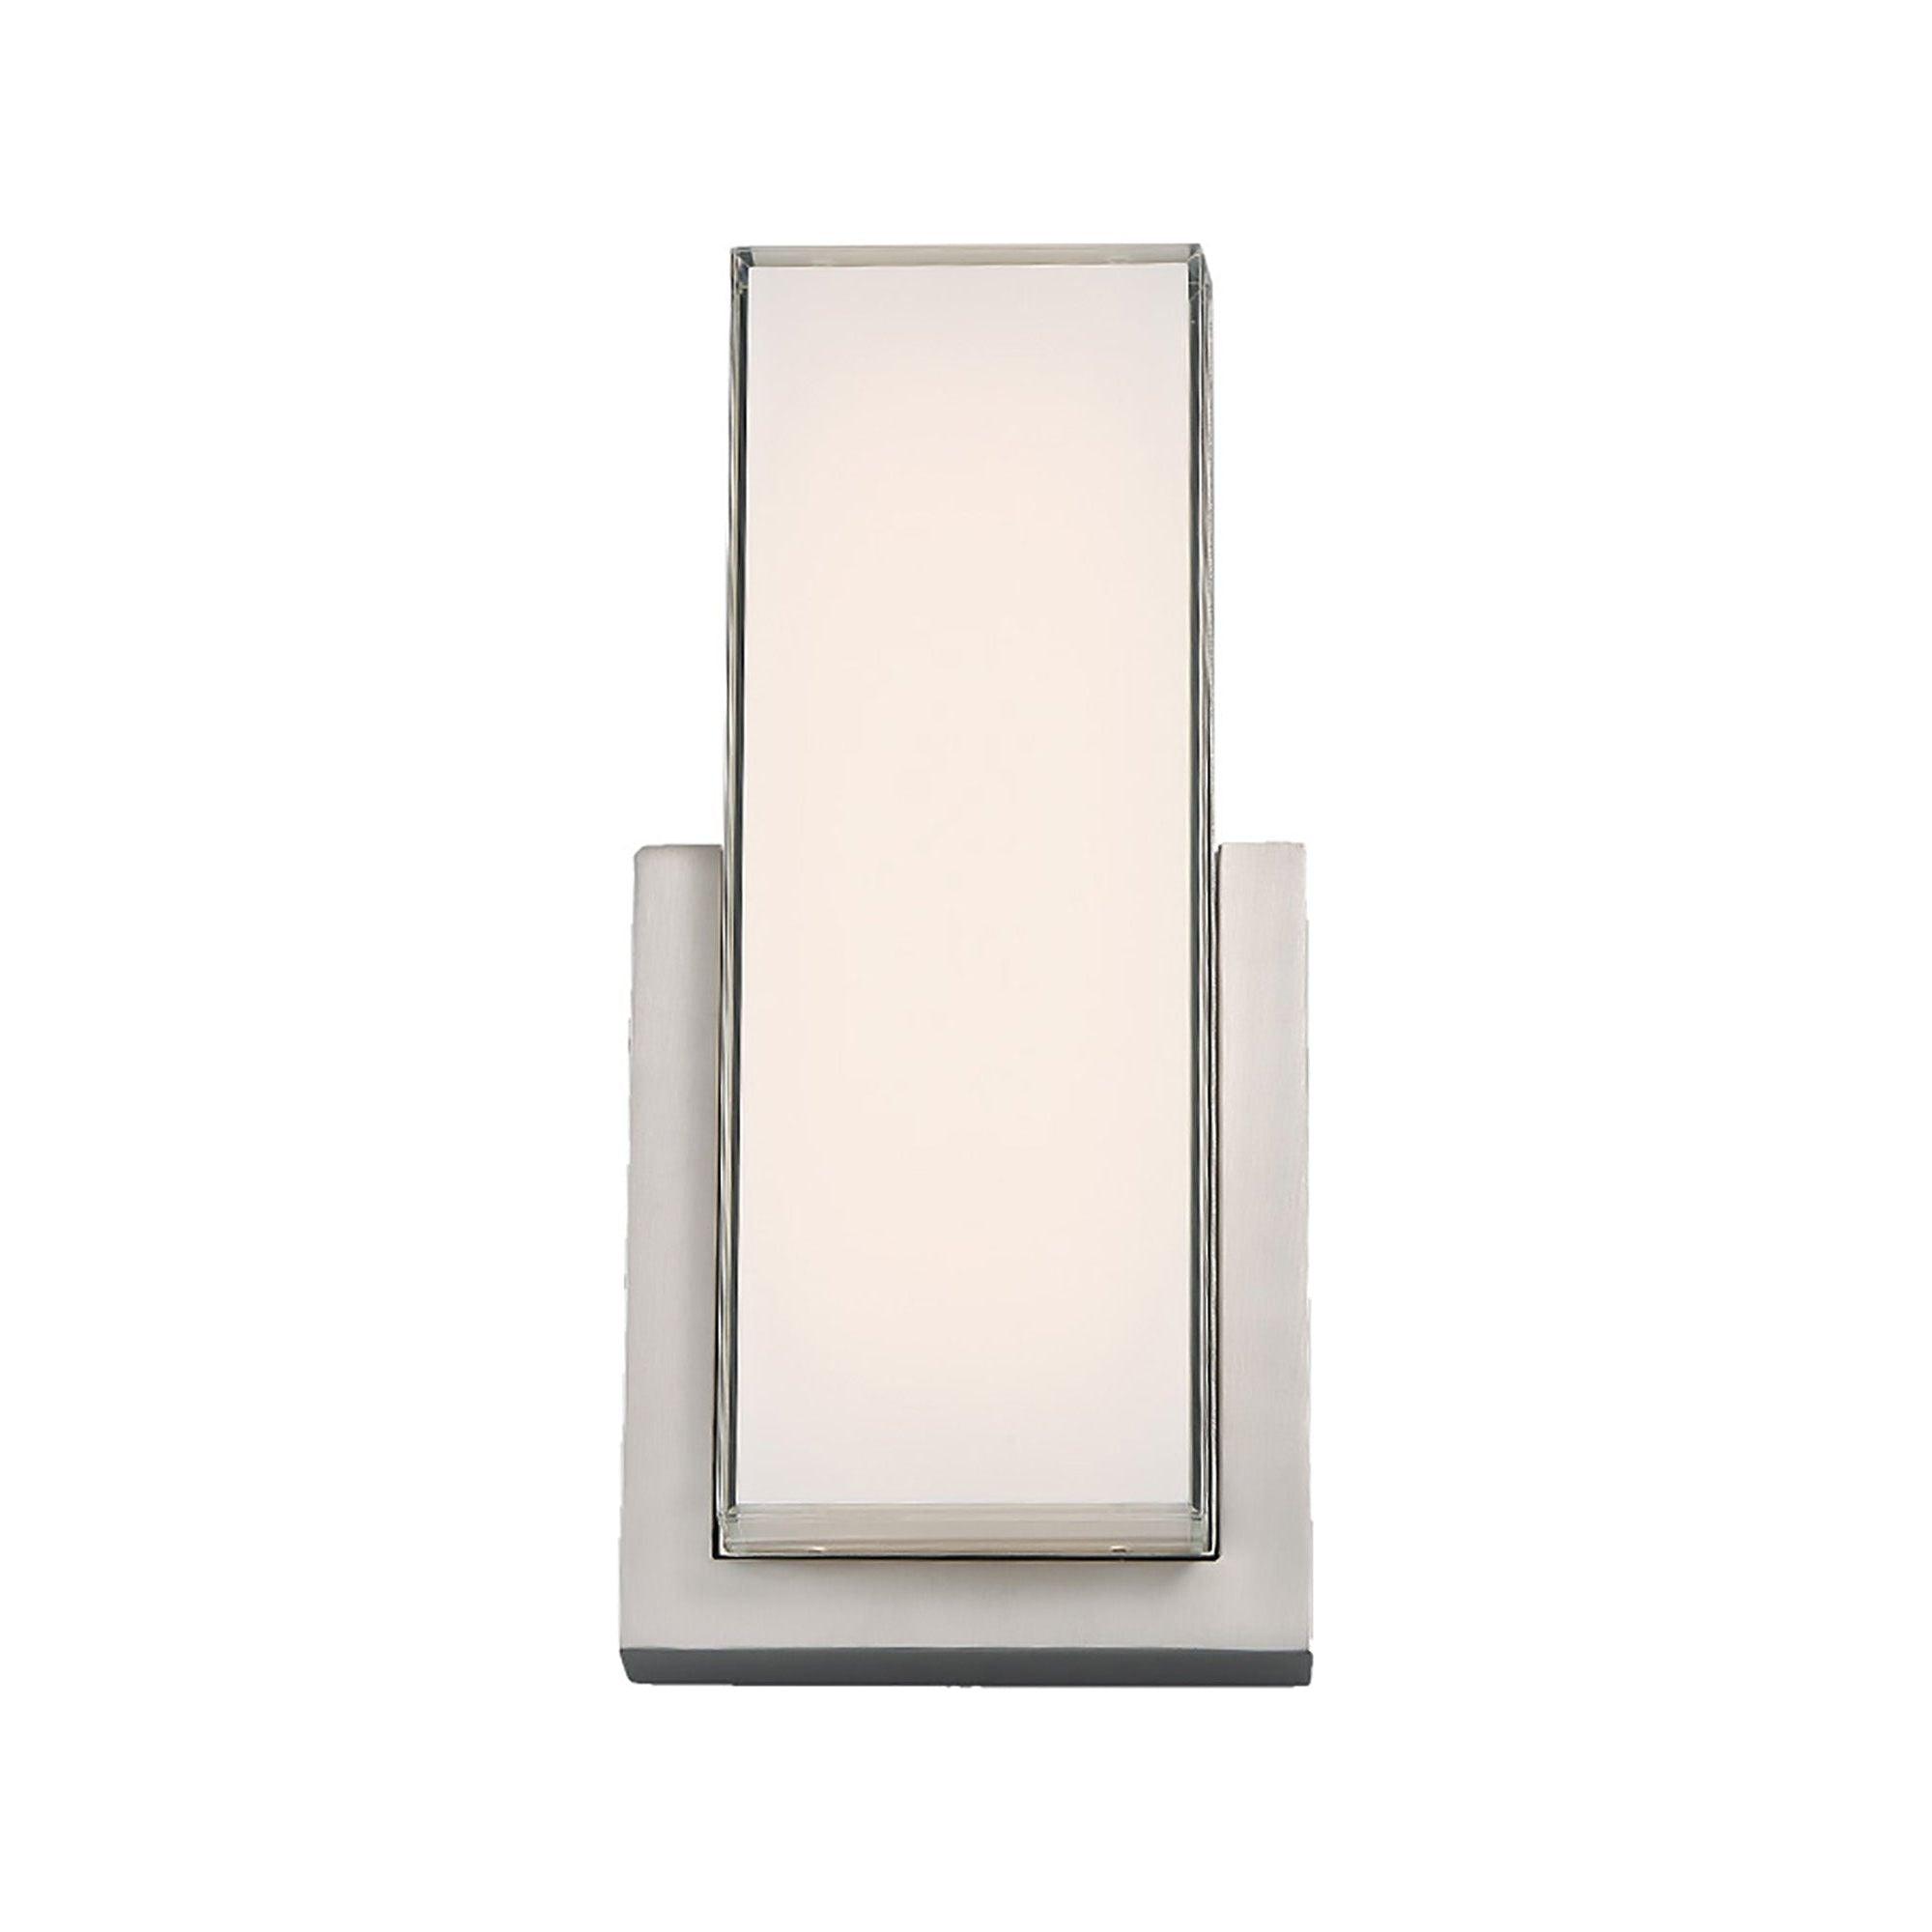 dweLED - Corbusier 15" LED Wall Sconce - Lights Canada